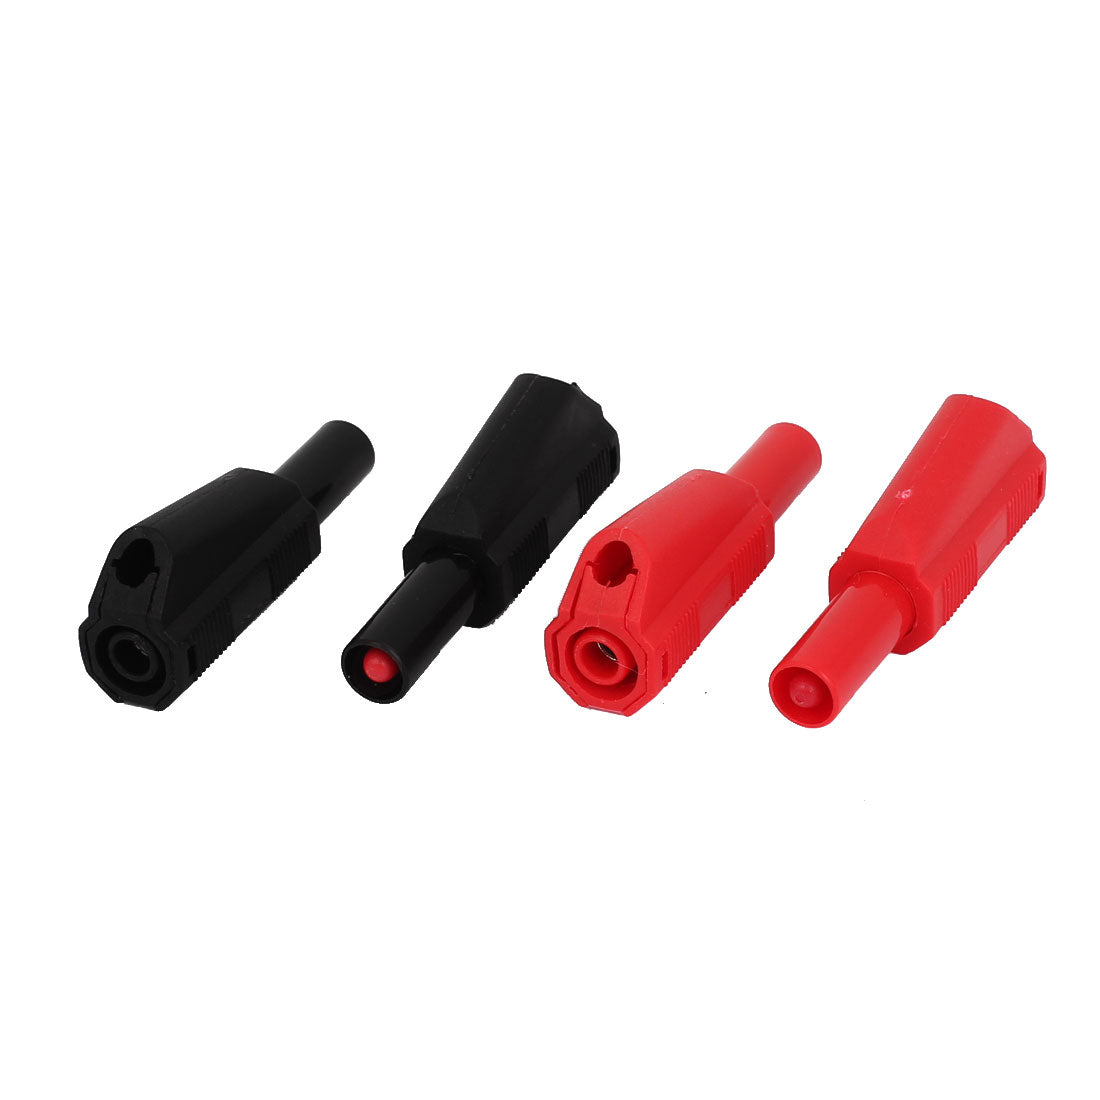 uxcell Uxcell 4 Pcs Multimeter Test Probes Banana Cables Connector Red Black